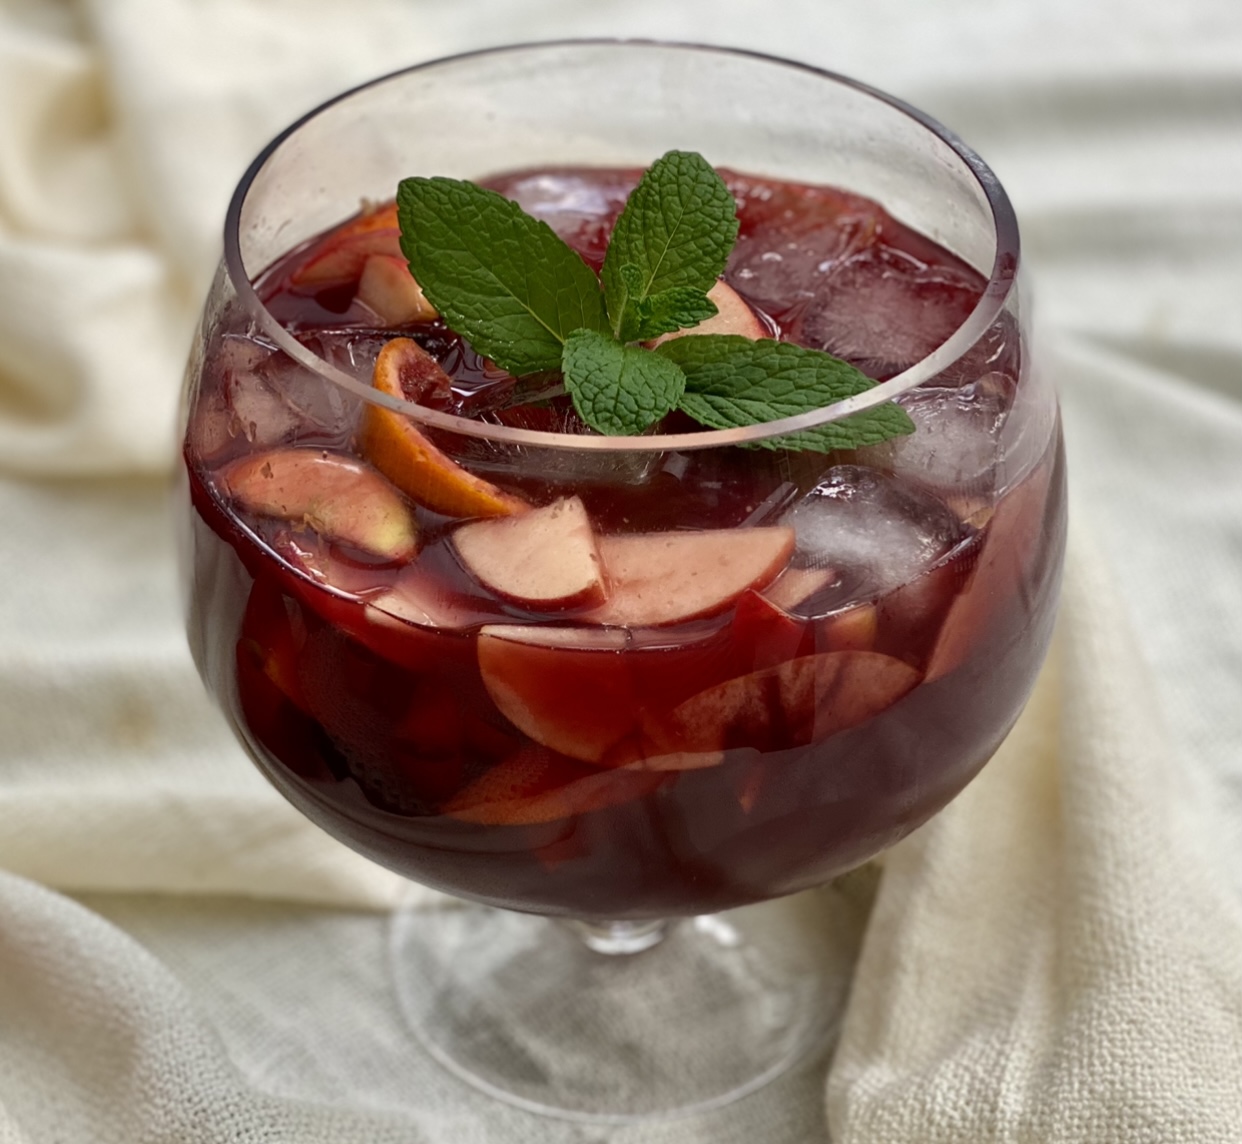 EASY RED SANGRIA